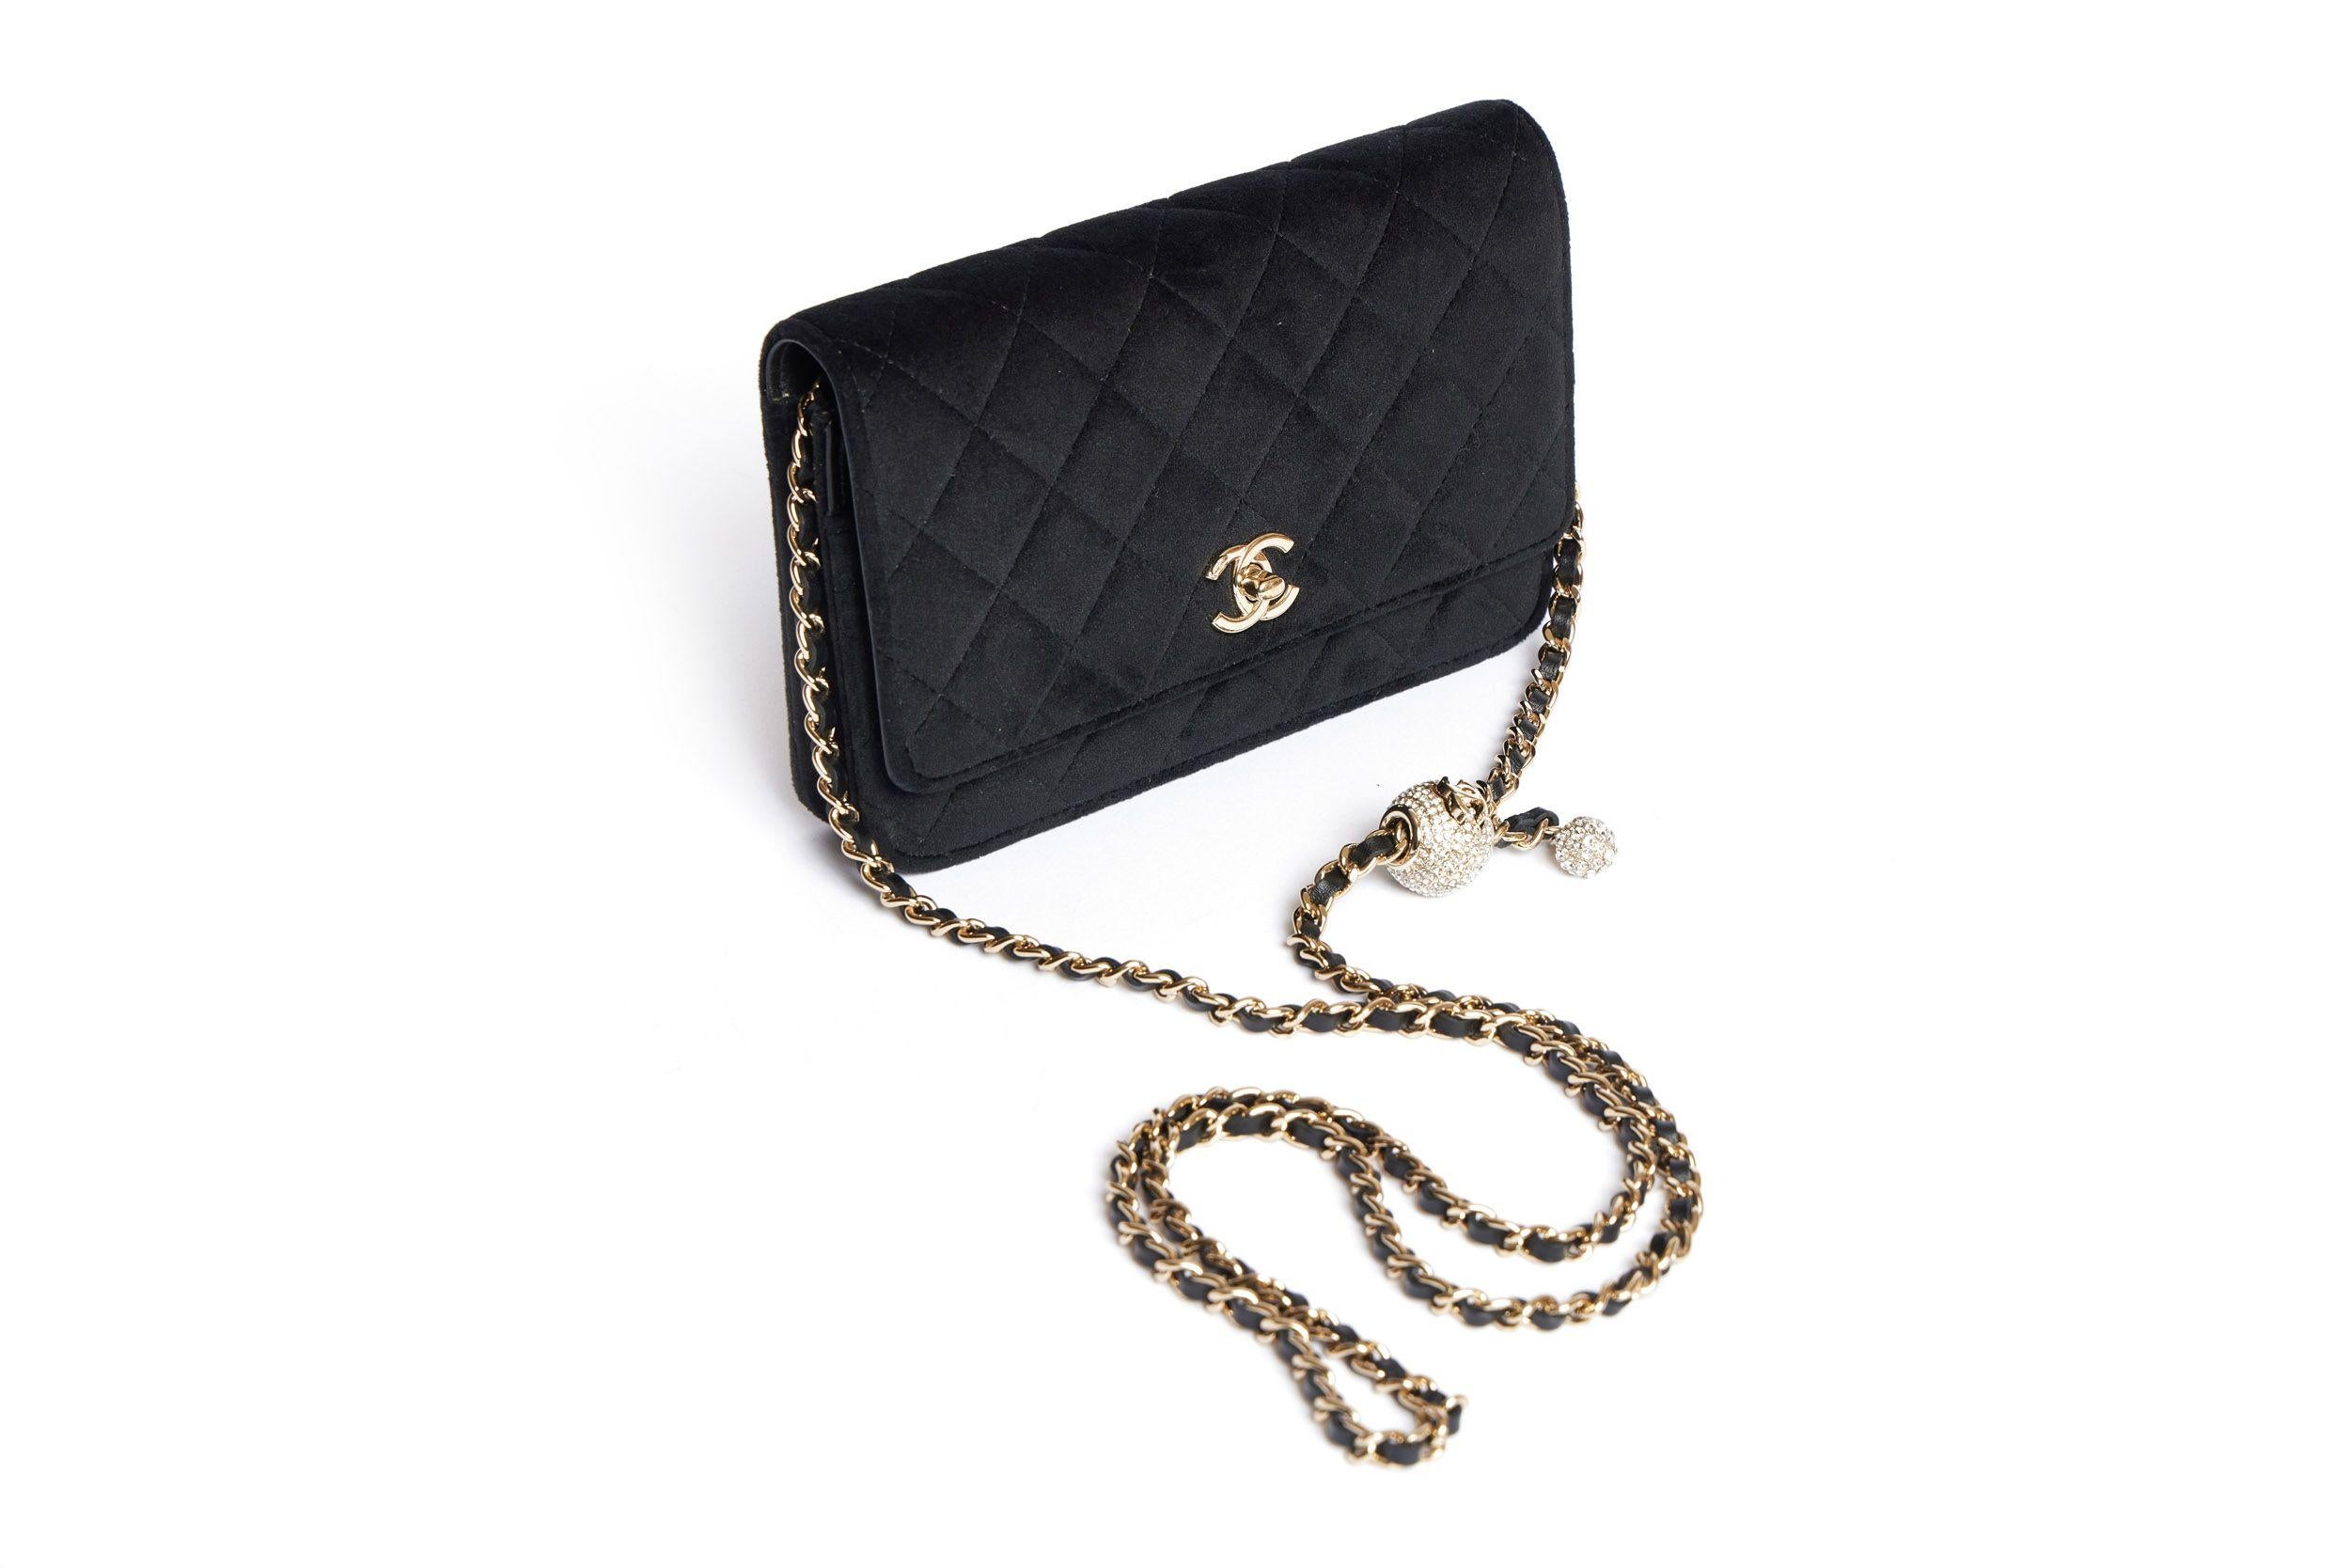 Chanel Velvet wallet on a leather-threated gold chain with a rhinestone charm attached to it. The charm is a ball with a CC logo and one smaller ball hanging on it. The shoulder drop is 23. The bag closes with a CC logo turn lock on the flap. The